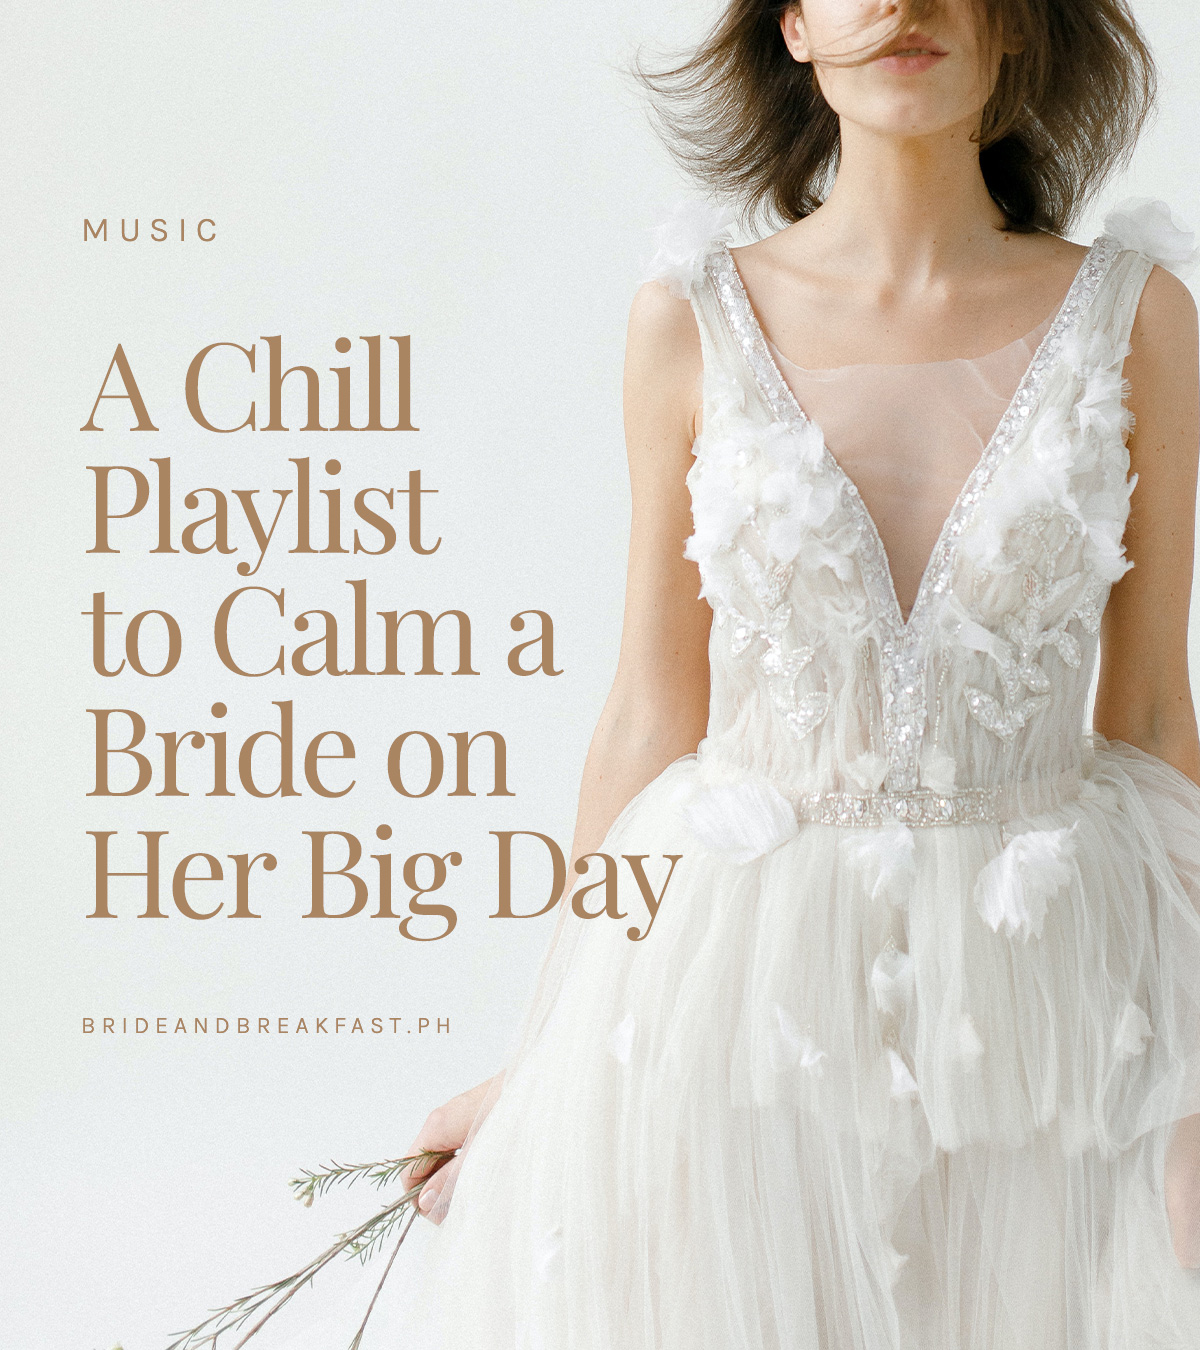 A Chill Playlist to Calm a Bride on Her Big Day